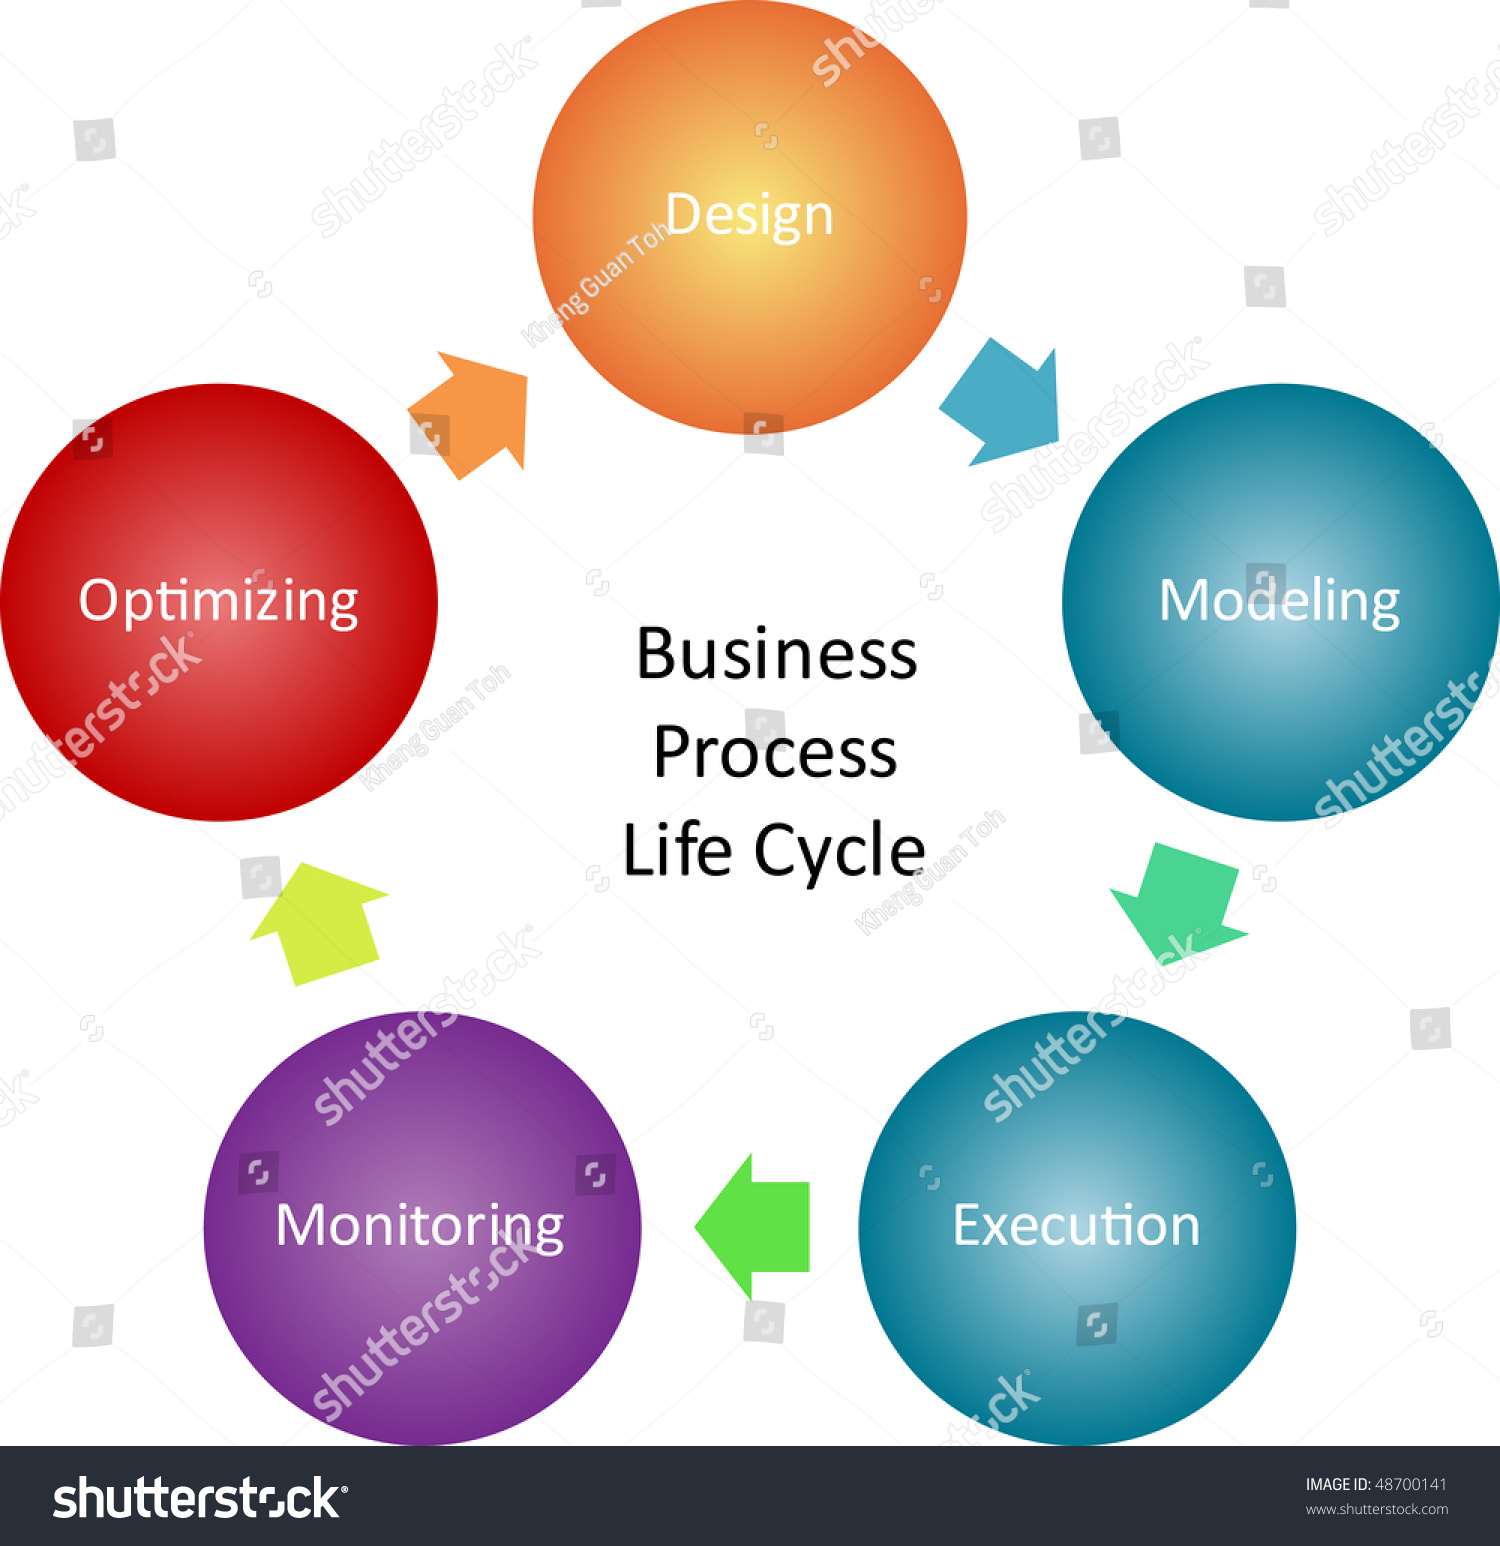 Project Management Life Cycle Diagram